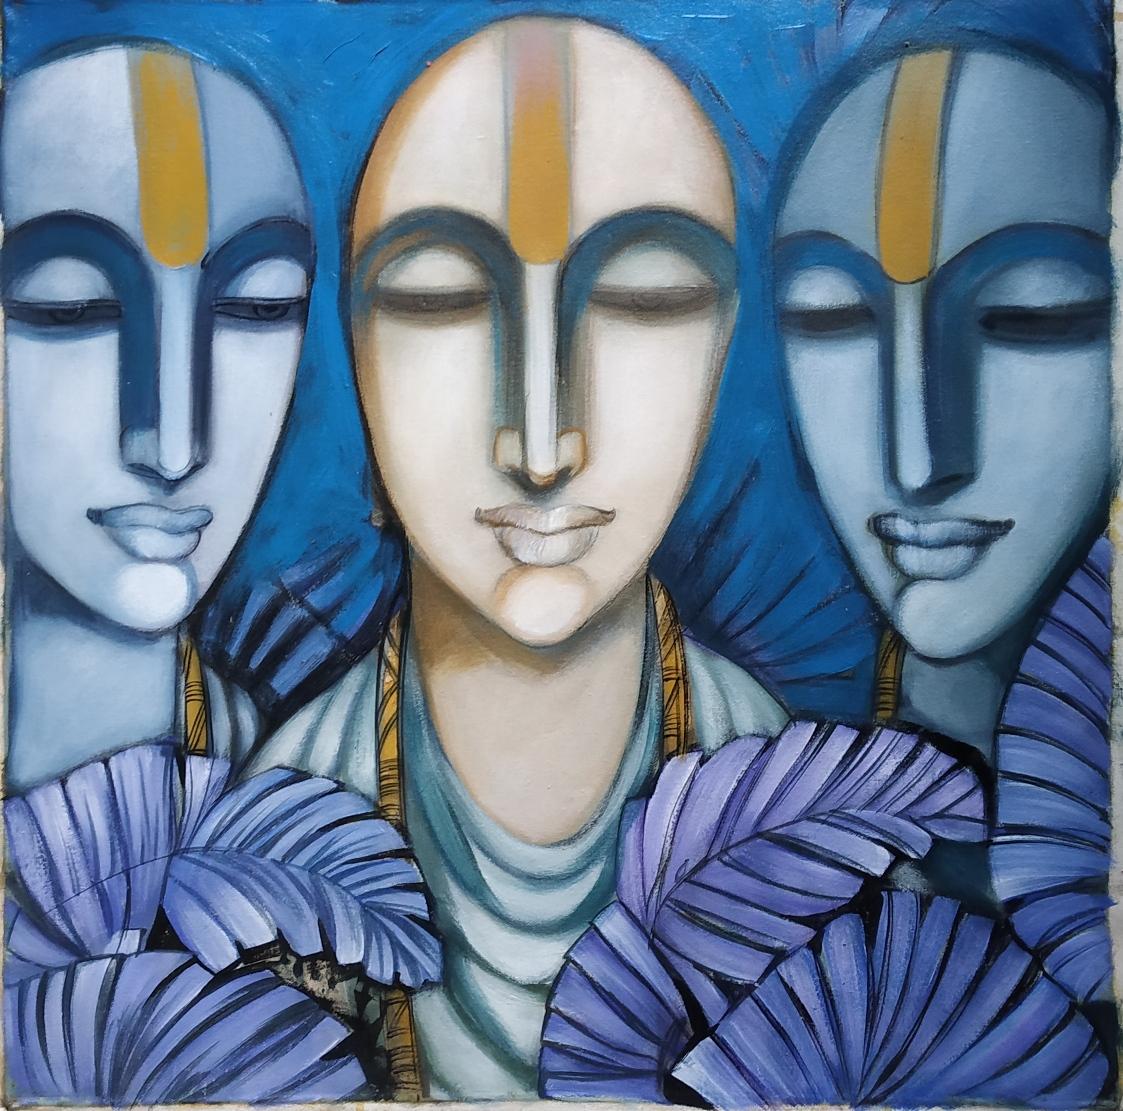 Dewashish Das Figurative Painting - Pandits, Dry Pigment Tempera on Canvas, Black, Blue by Indian Artist "In Stock"